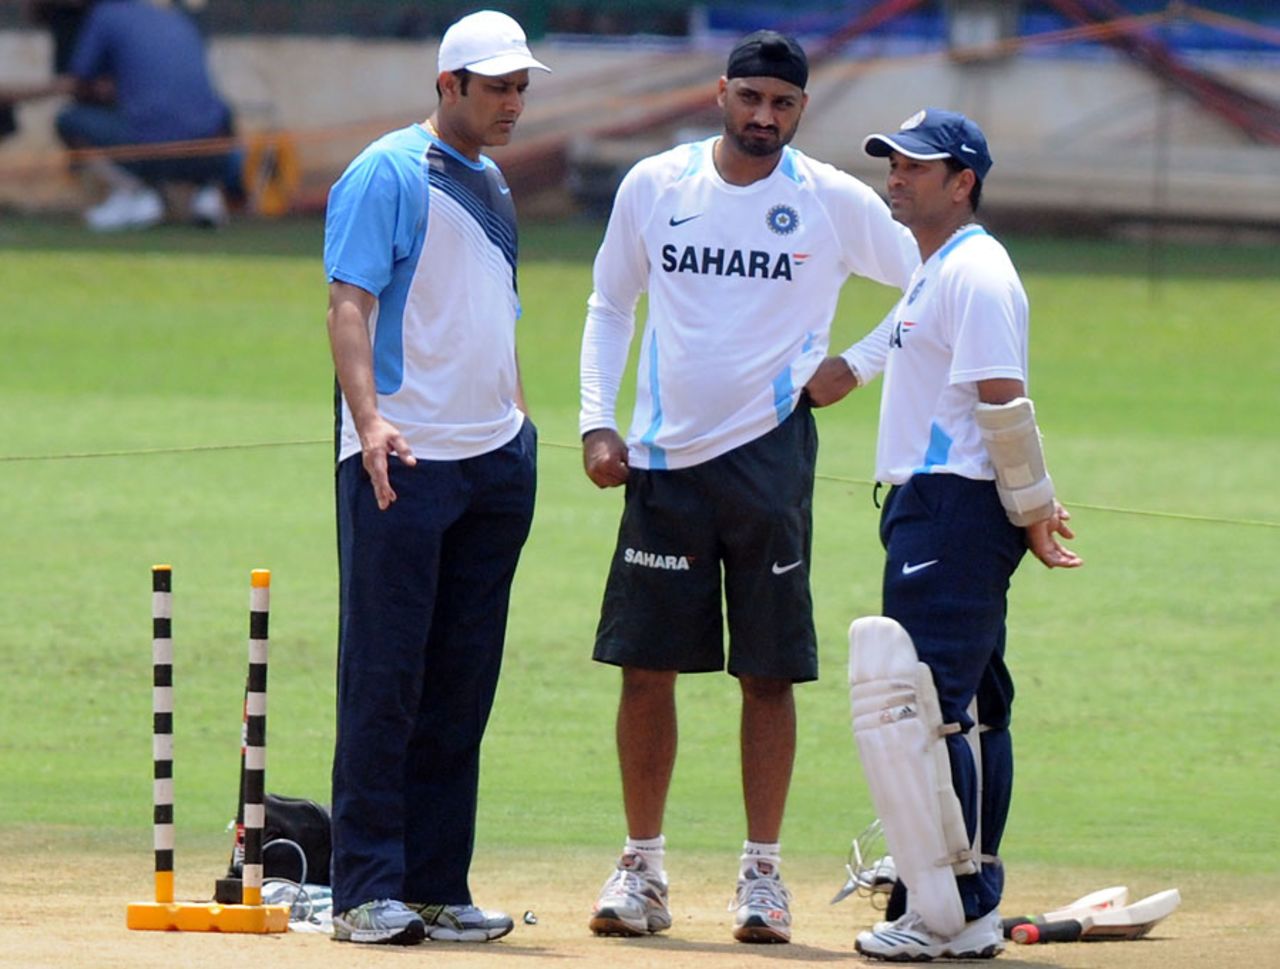 Anil Kumble joins Harbhajan Singh and Sachin Tendulkar as they inspect the wicket, Bangalore, October 8, 2010